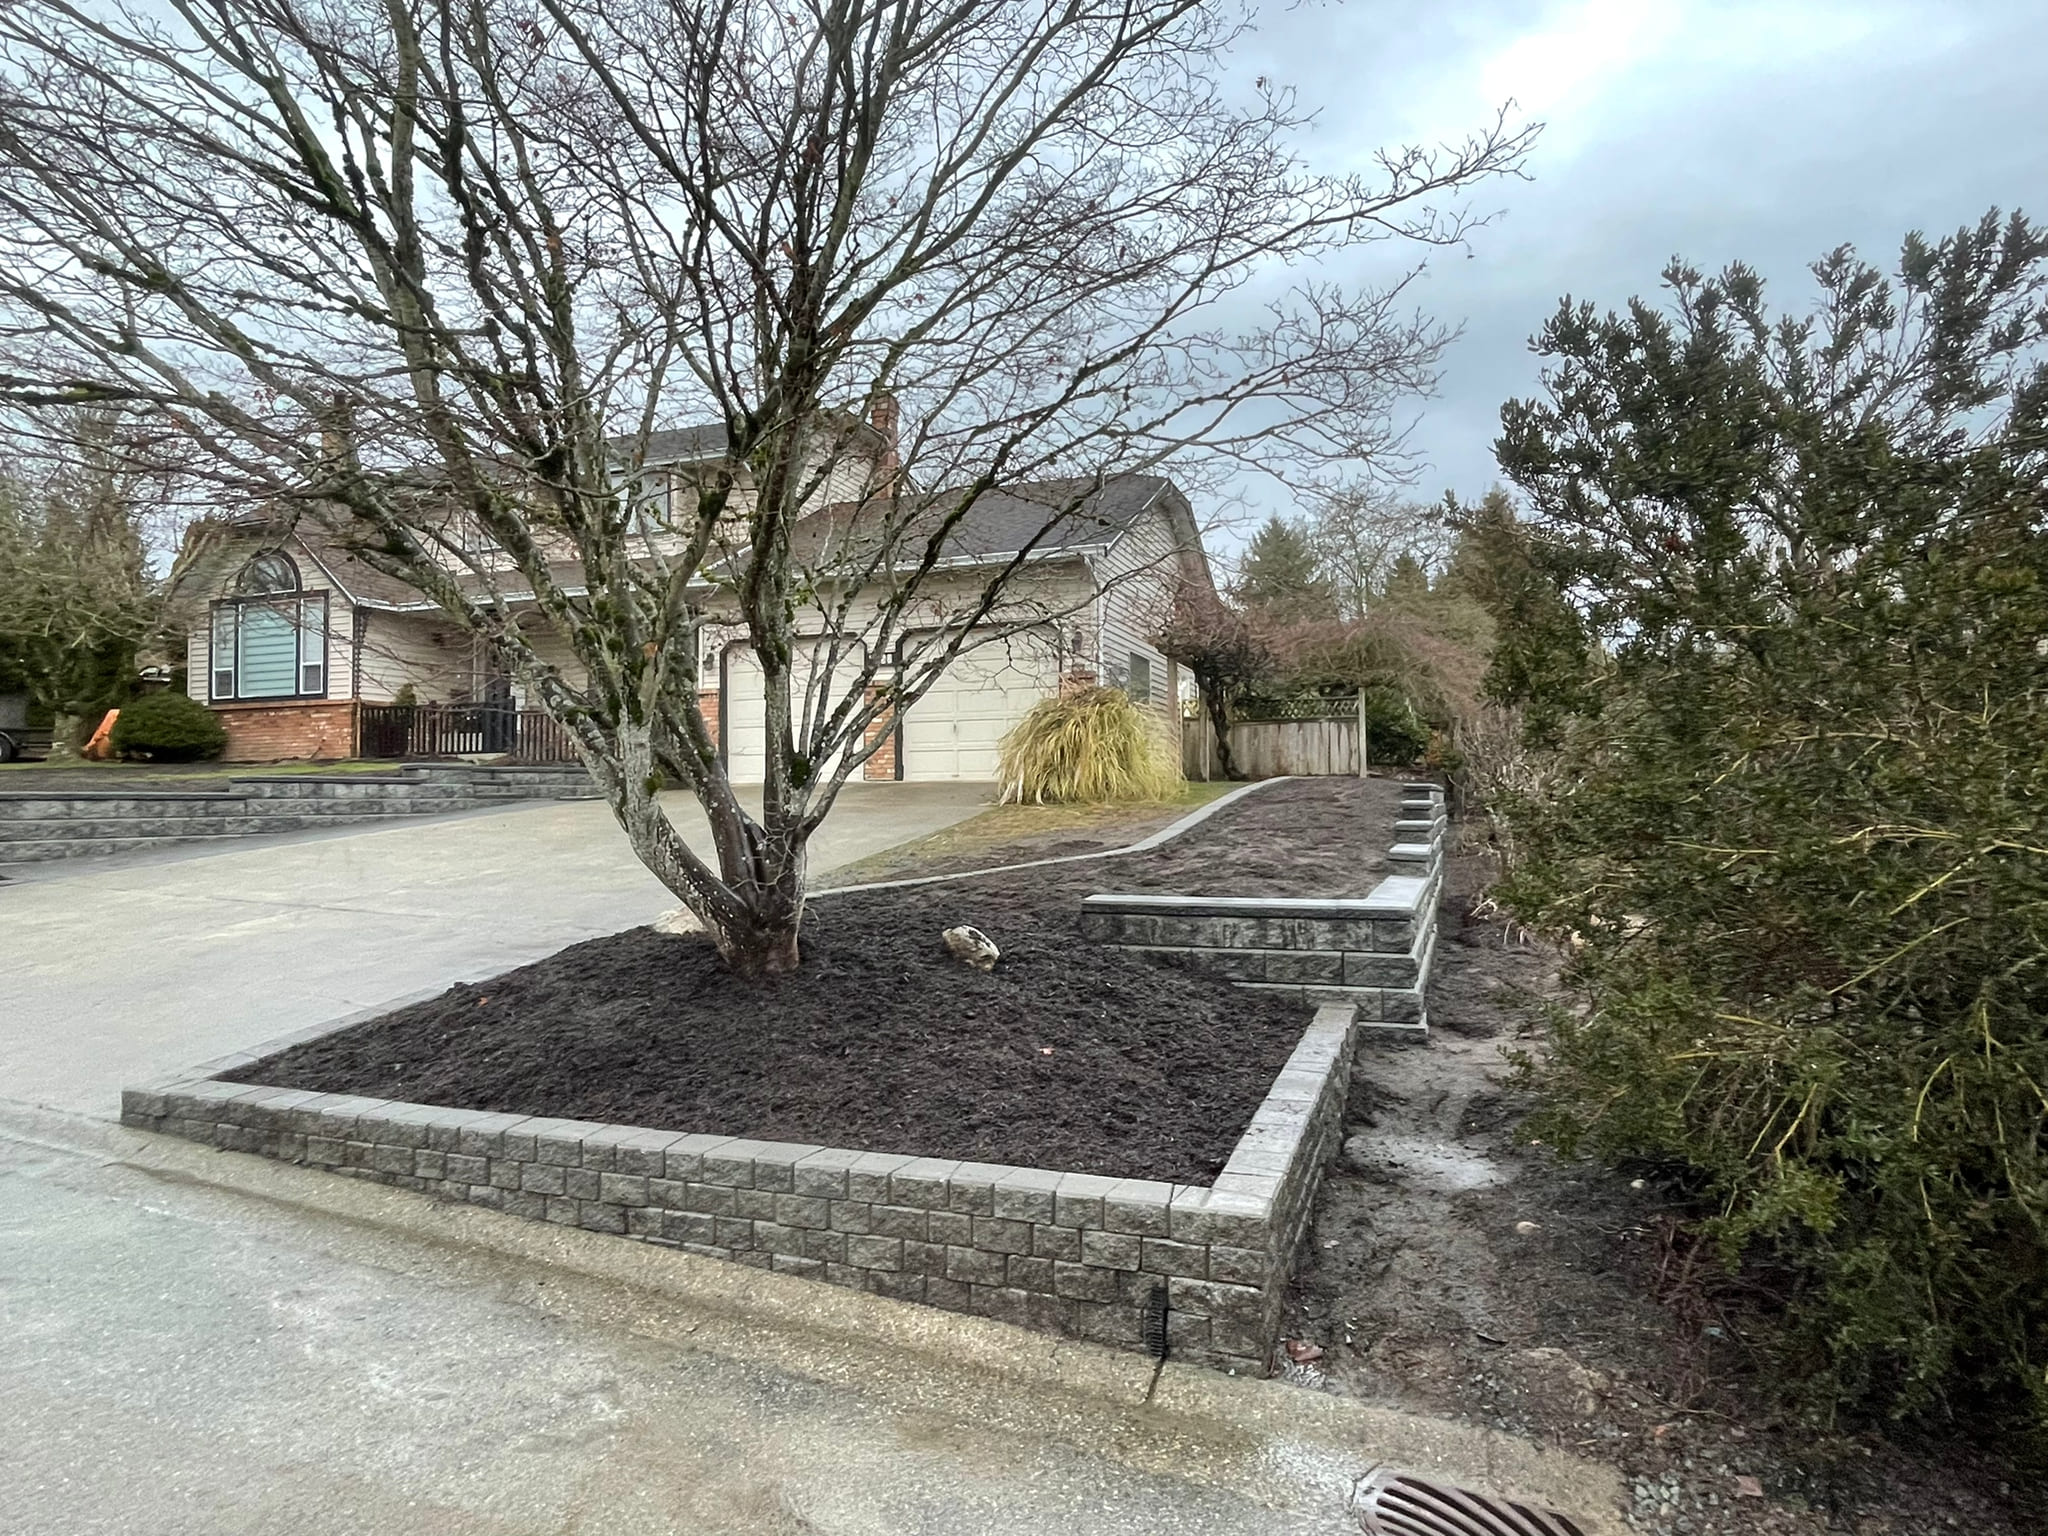 the south side garden bed with the large maple tree now without leaves. the stack stone wall starts at the allan block wall and comes out the the street and follows along hte street then down the driveway